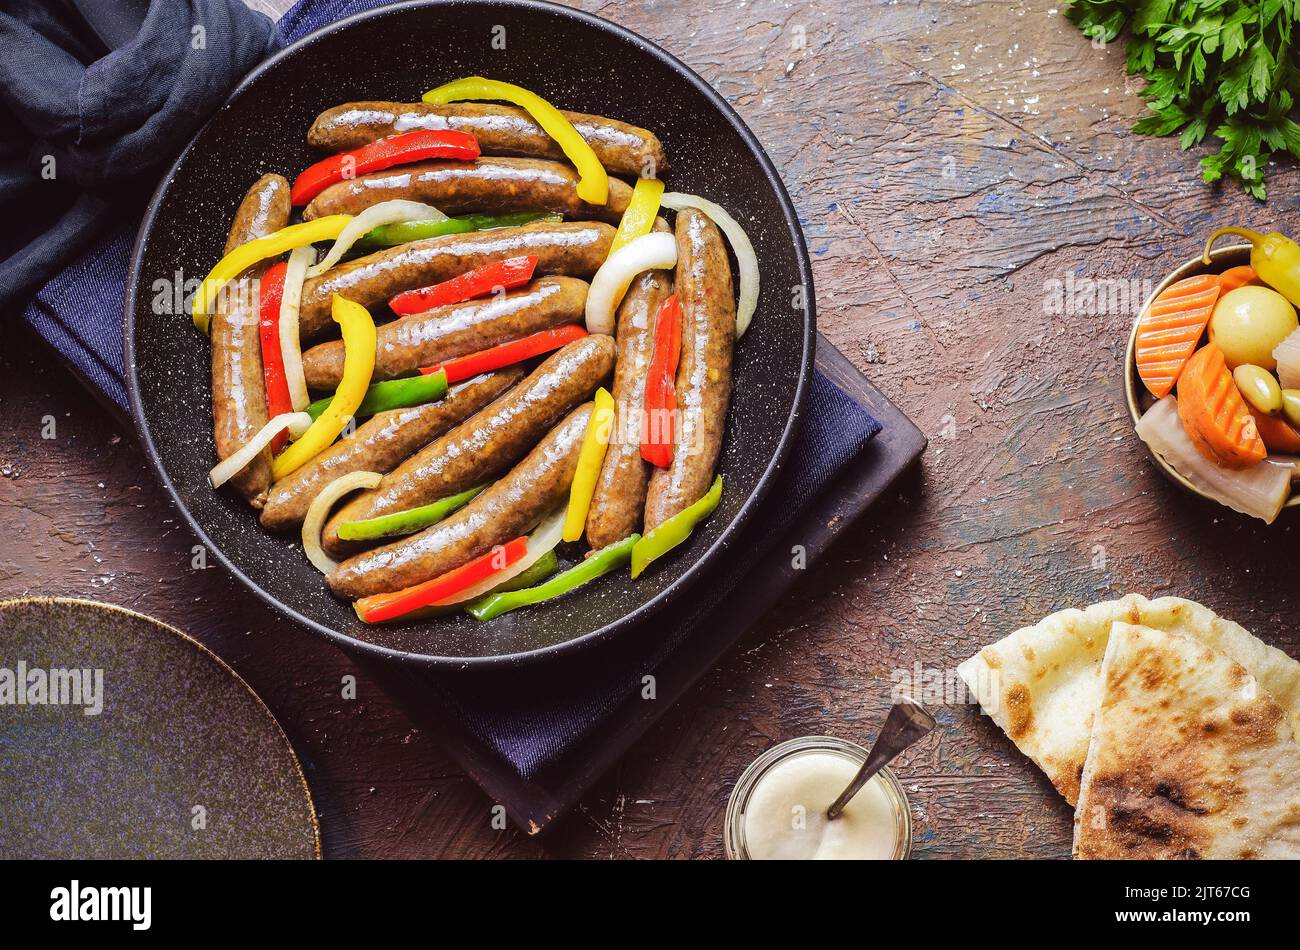 Arabic cuisine; Egyptian traditional sausage with onions, bell peppers and chili peppers. Served with oriental pickles, tahini sauce and pita bread. Stock Photo